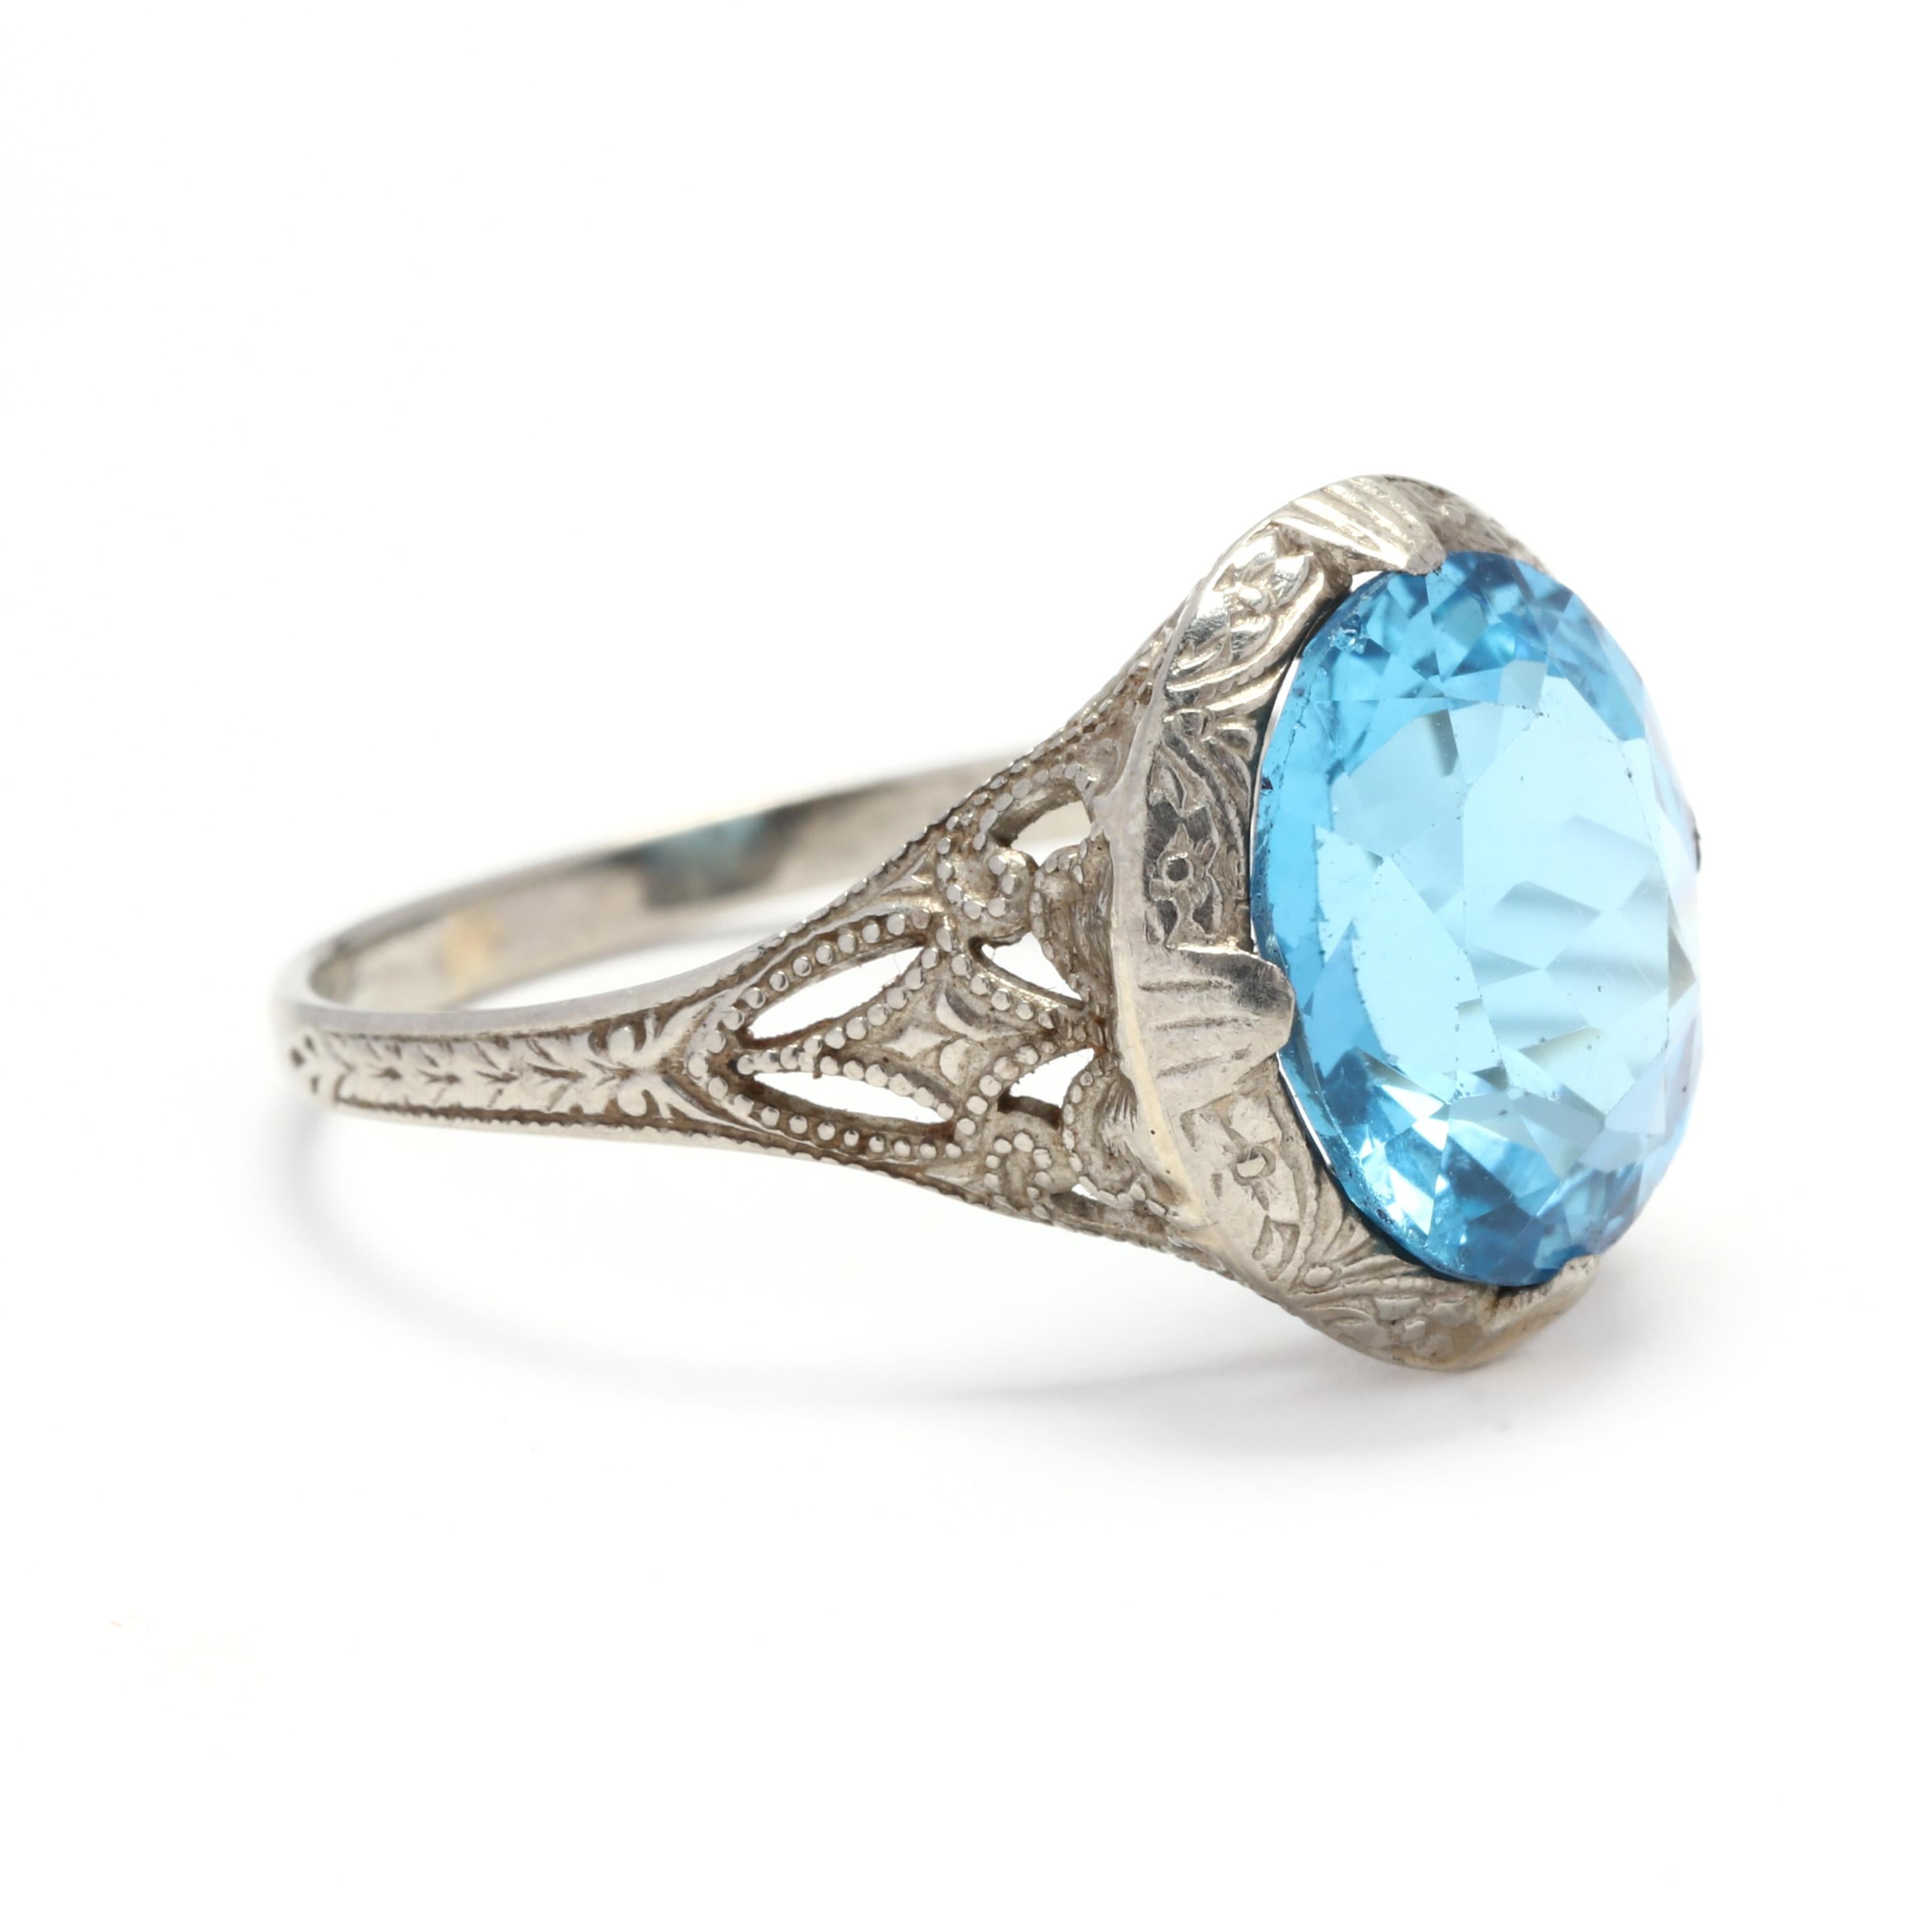 An Art Deco 10 karat white gold and blue topaz filigree ring. This ring is centered on a prong set, oval cut blue topaz stone weighing approximately 3.6 carats set in an engraved filigree mounting with milgrain detailing.

Stones:
- blue topaz, 1